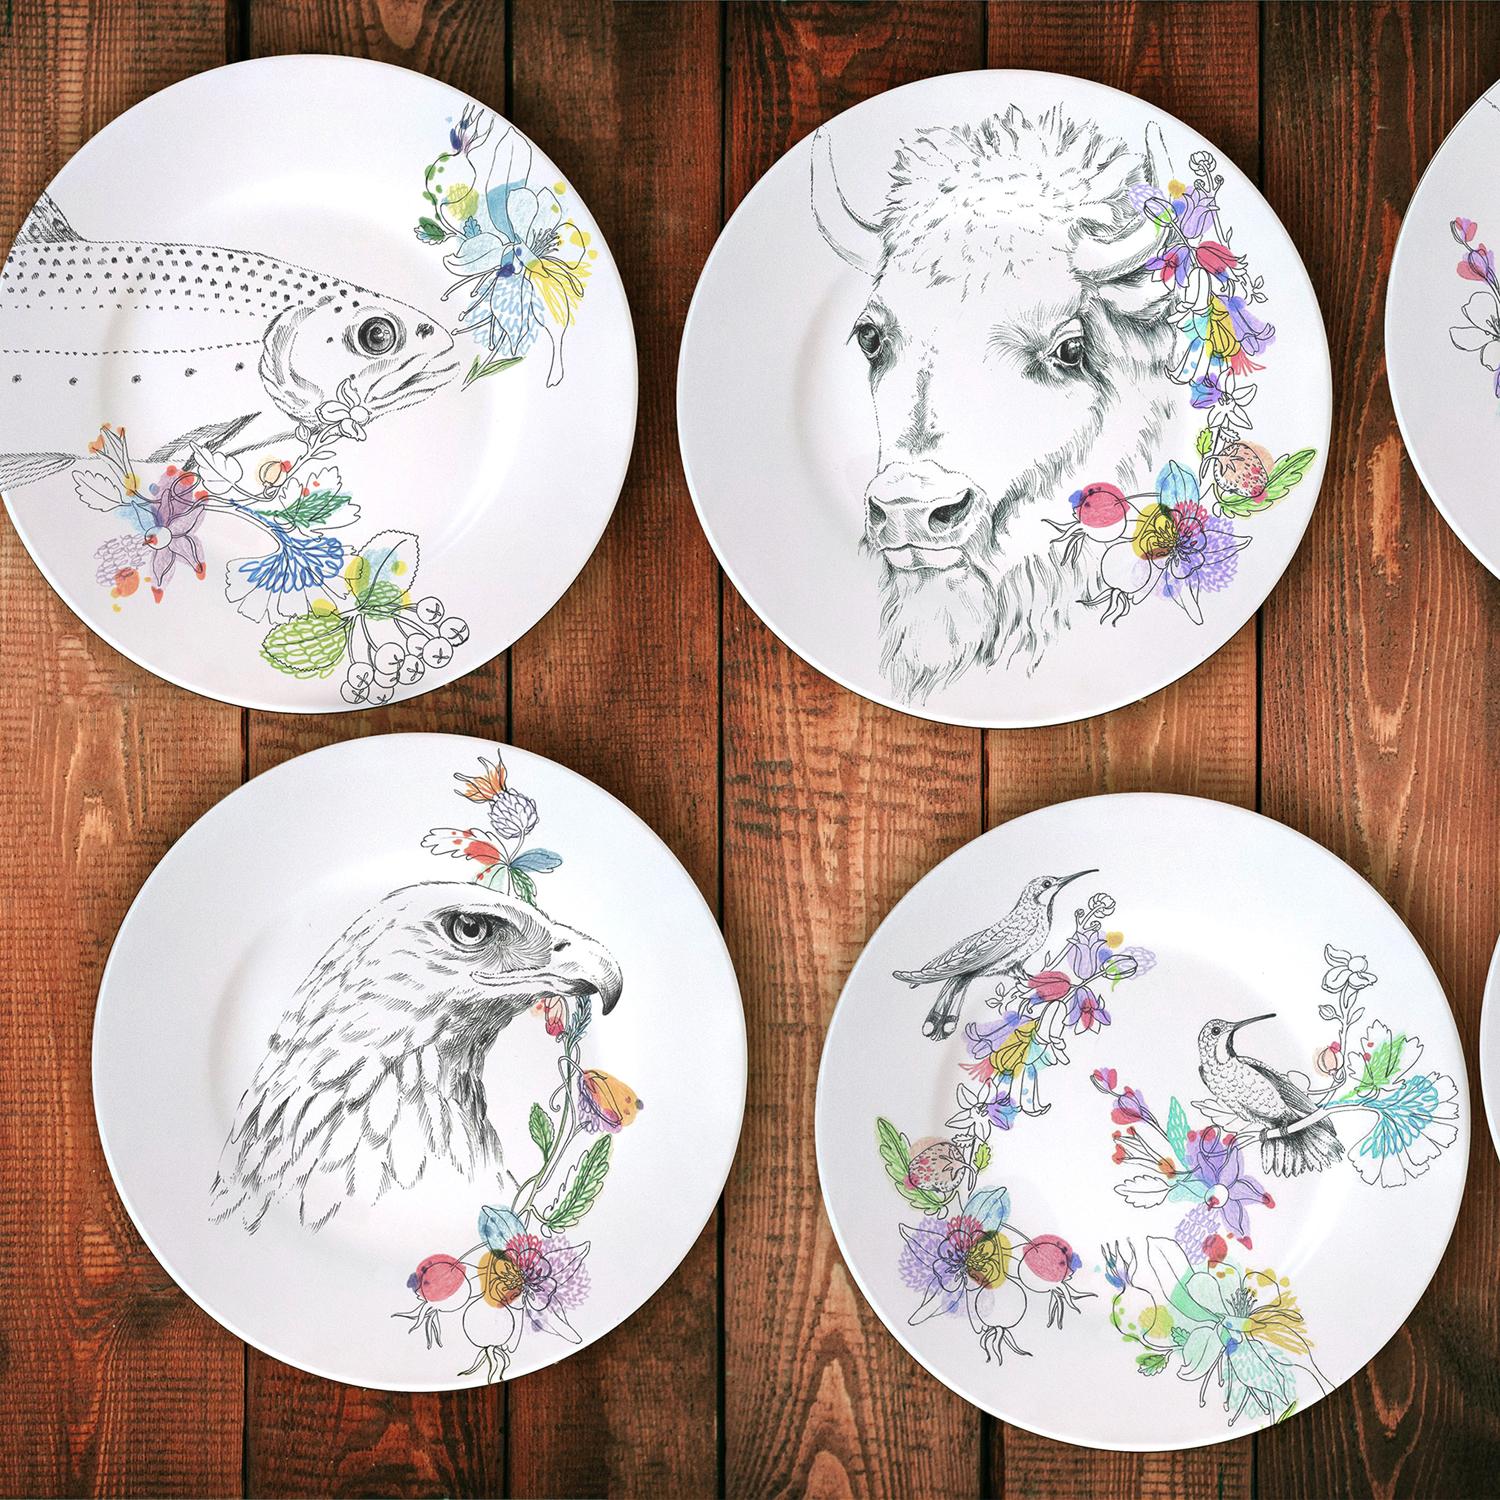 Ode to the Woods, Contemporary Porcelain Dinner Plate with Deer and Flowers For Sale 2